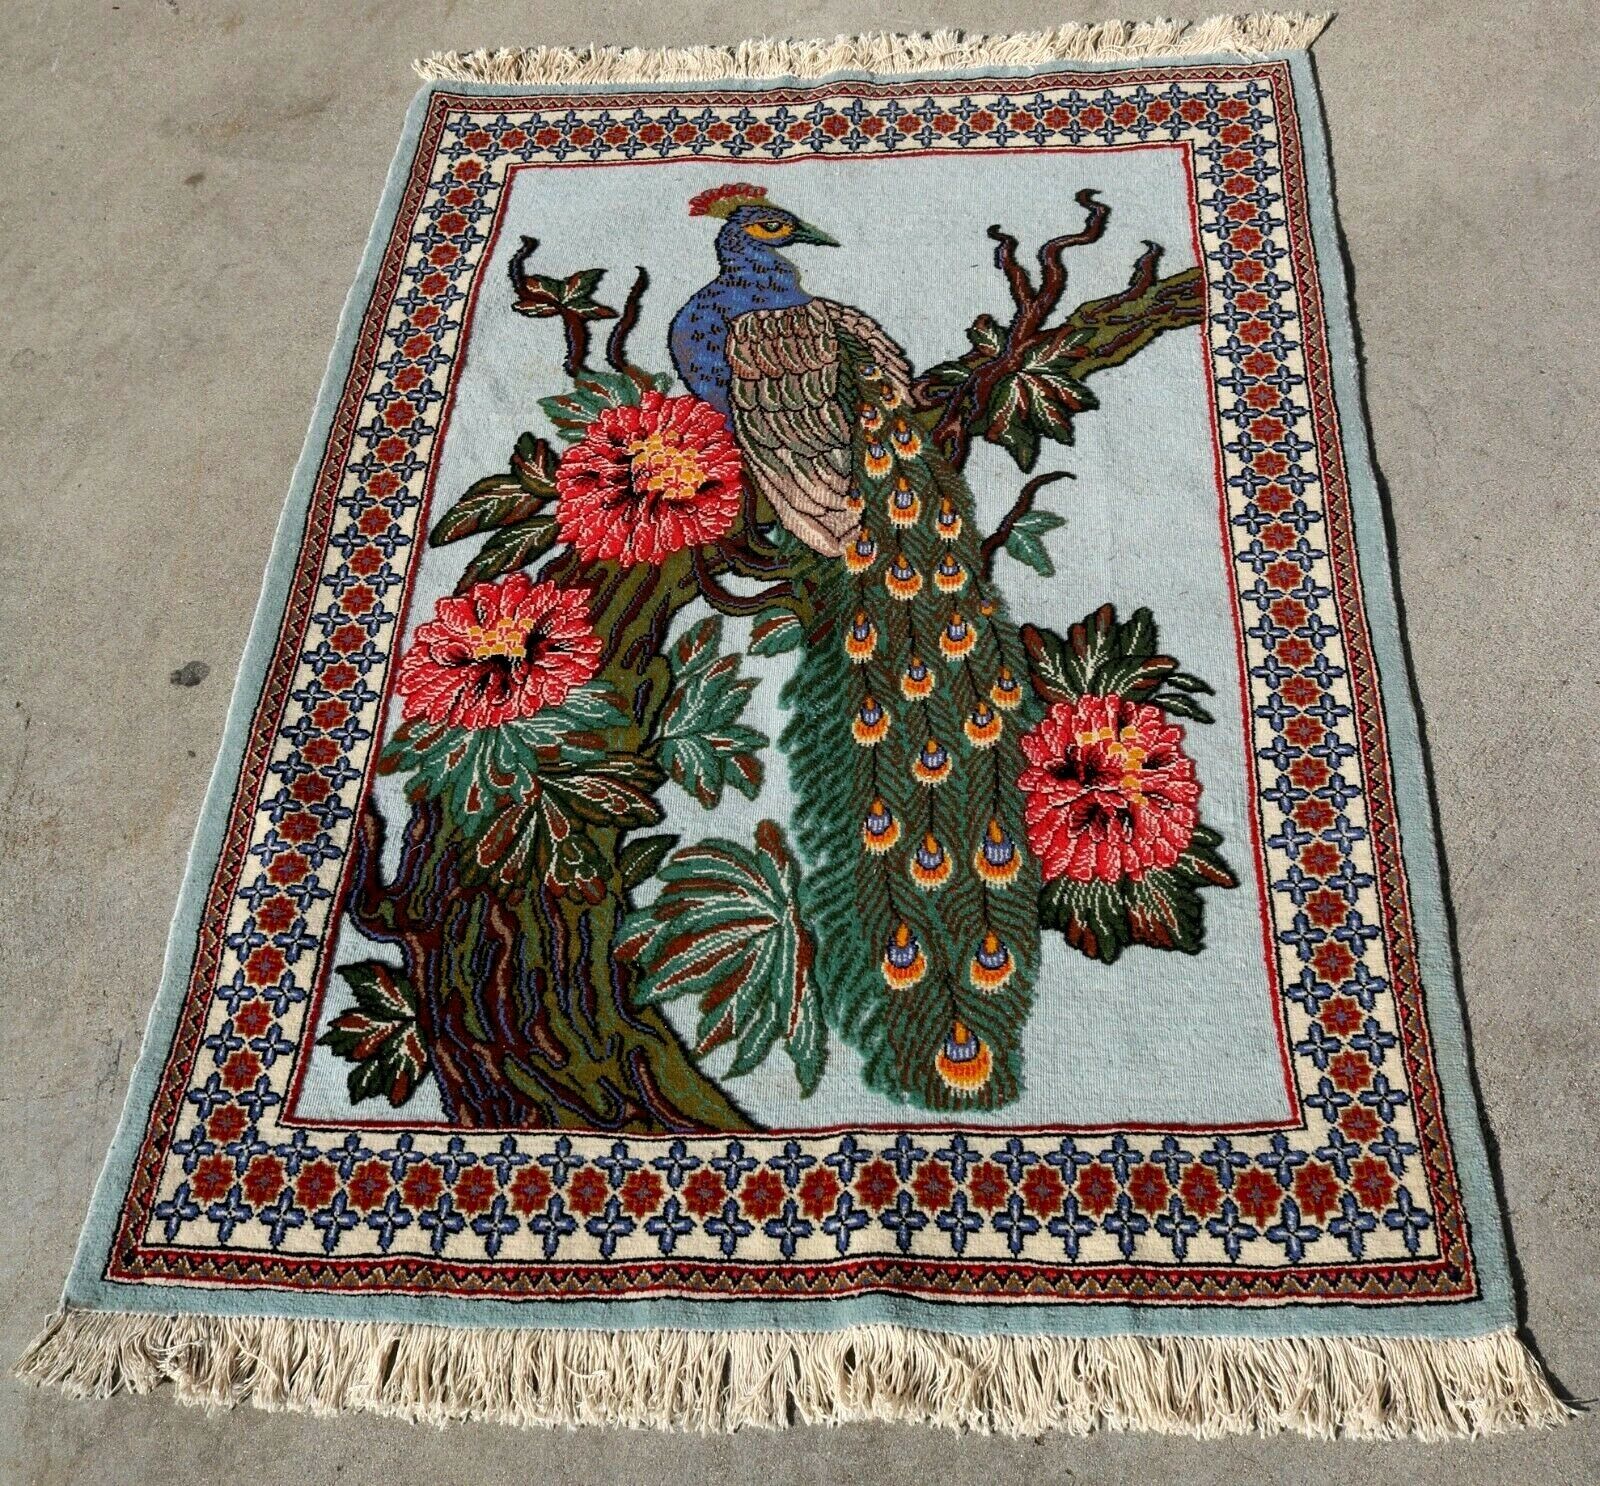 Beautiful Vintage Hand Woven Wool Islamic Rug With Peacock Design